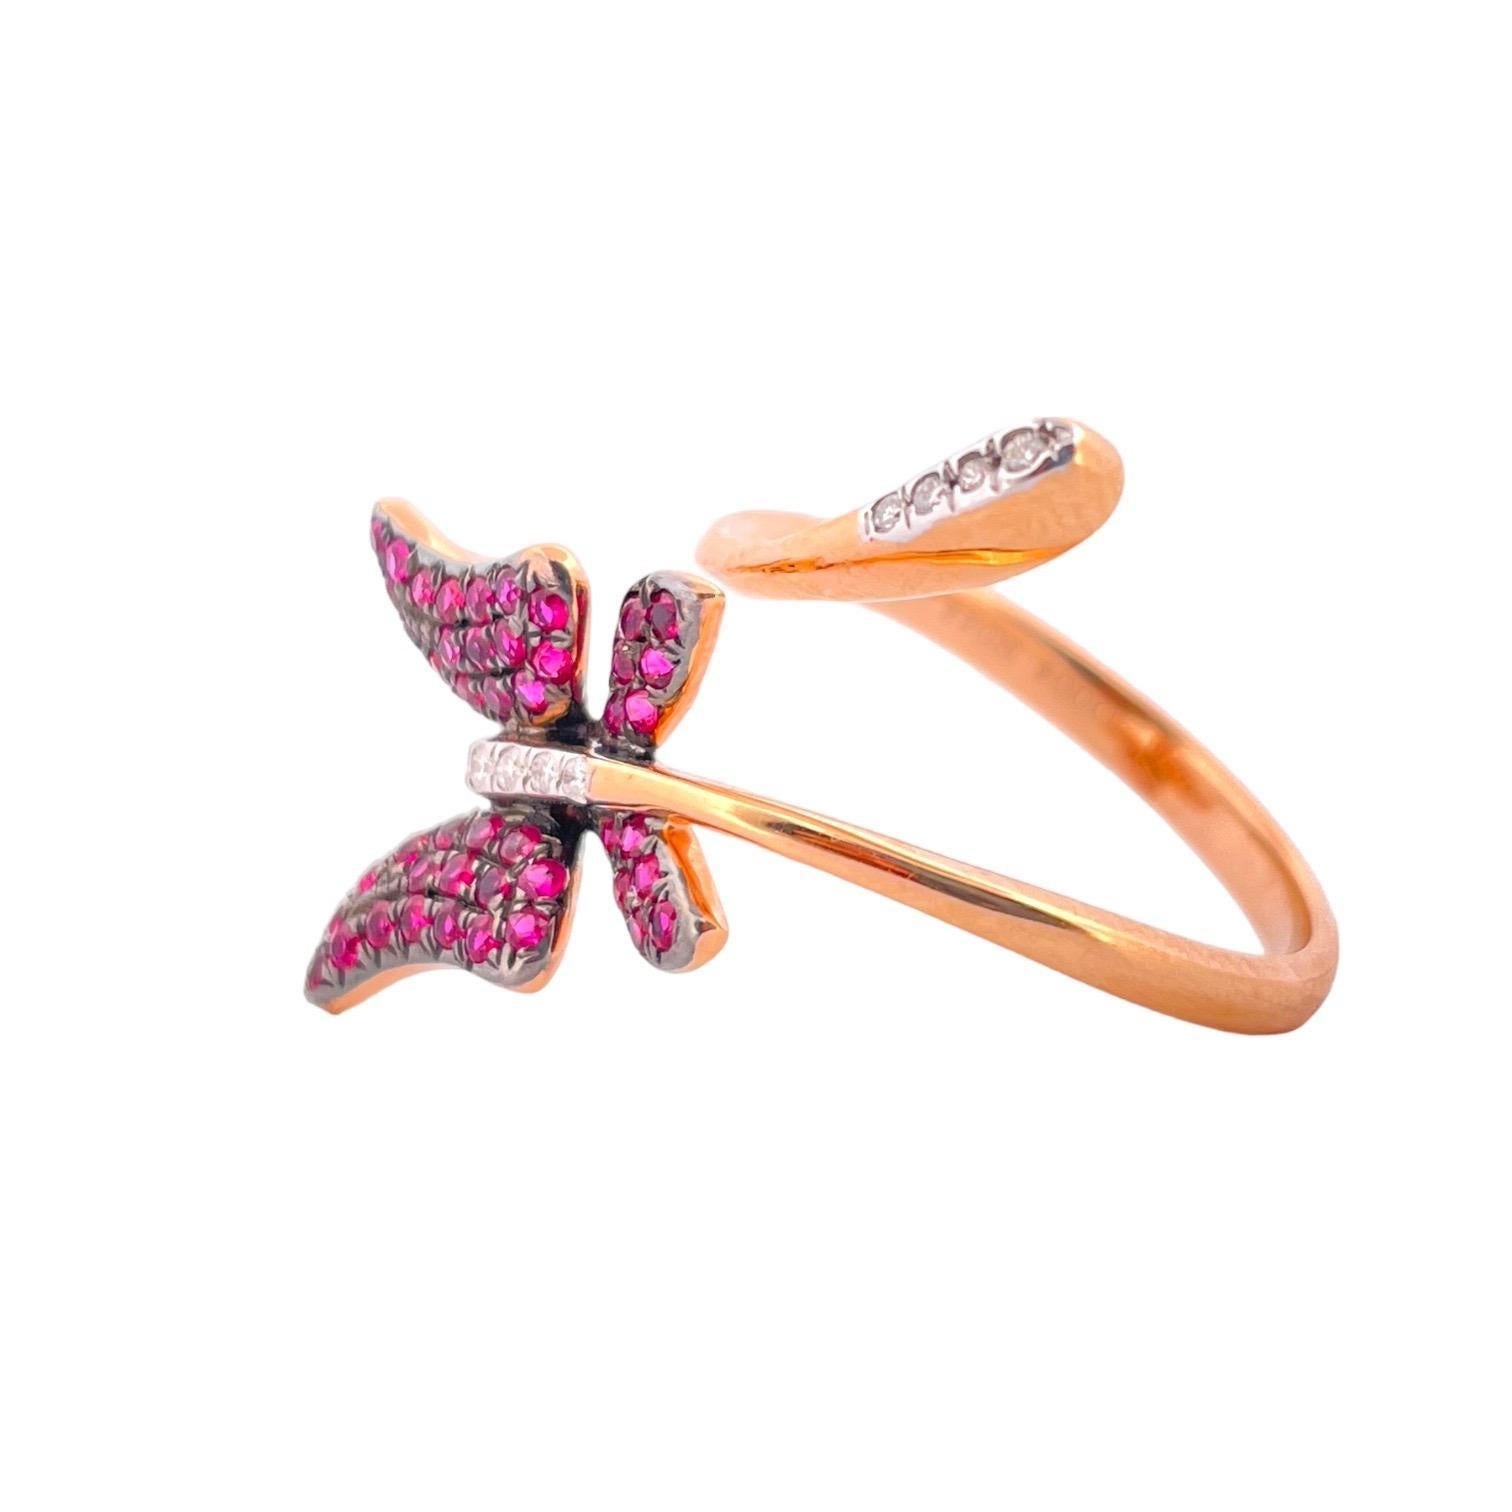 Embrace the enchantment of our Ruby Butterfly Diamond Ring, a stunning piece of jewelry artistry. This exquisite ring features a delicate butterfly design adorned with a vivid 0.48 carat total carat weight (TCW) of ruby gemstones, all elegantly set